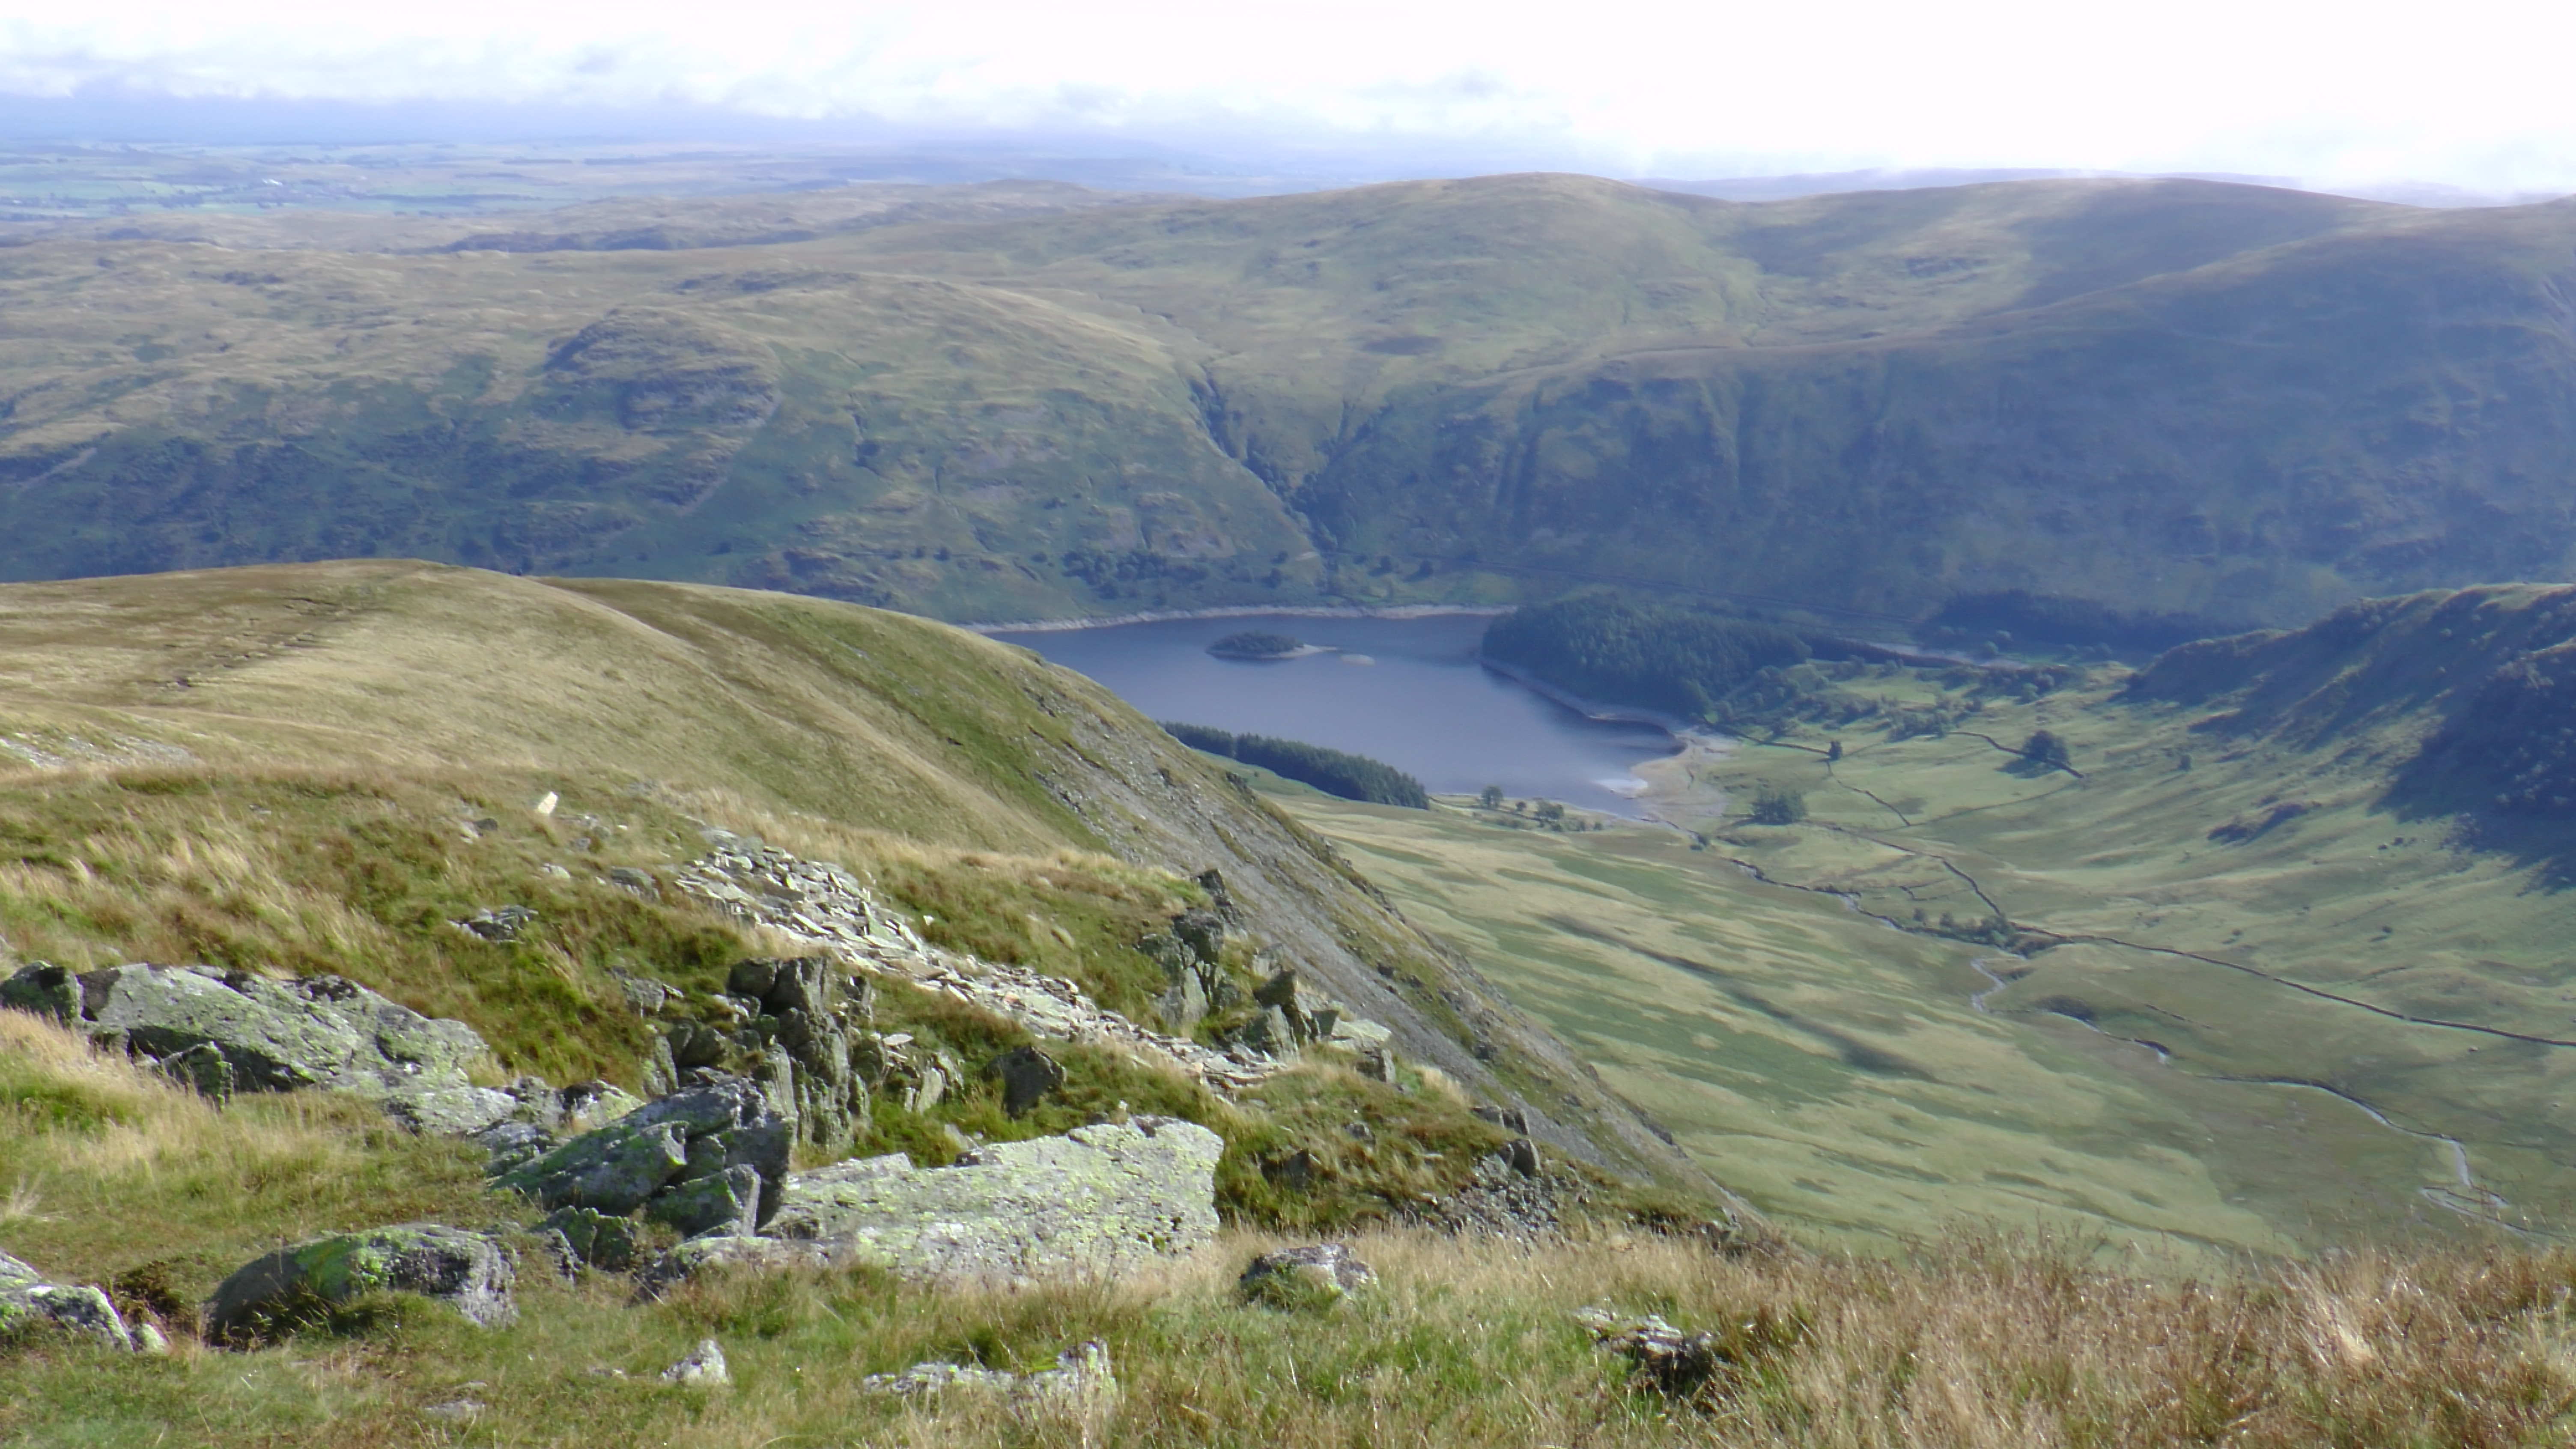 Looking ahead to Haweswater